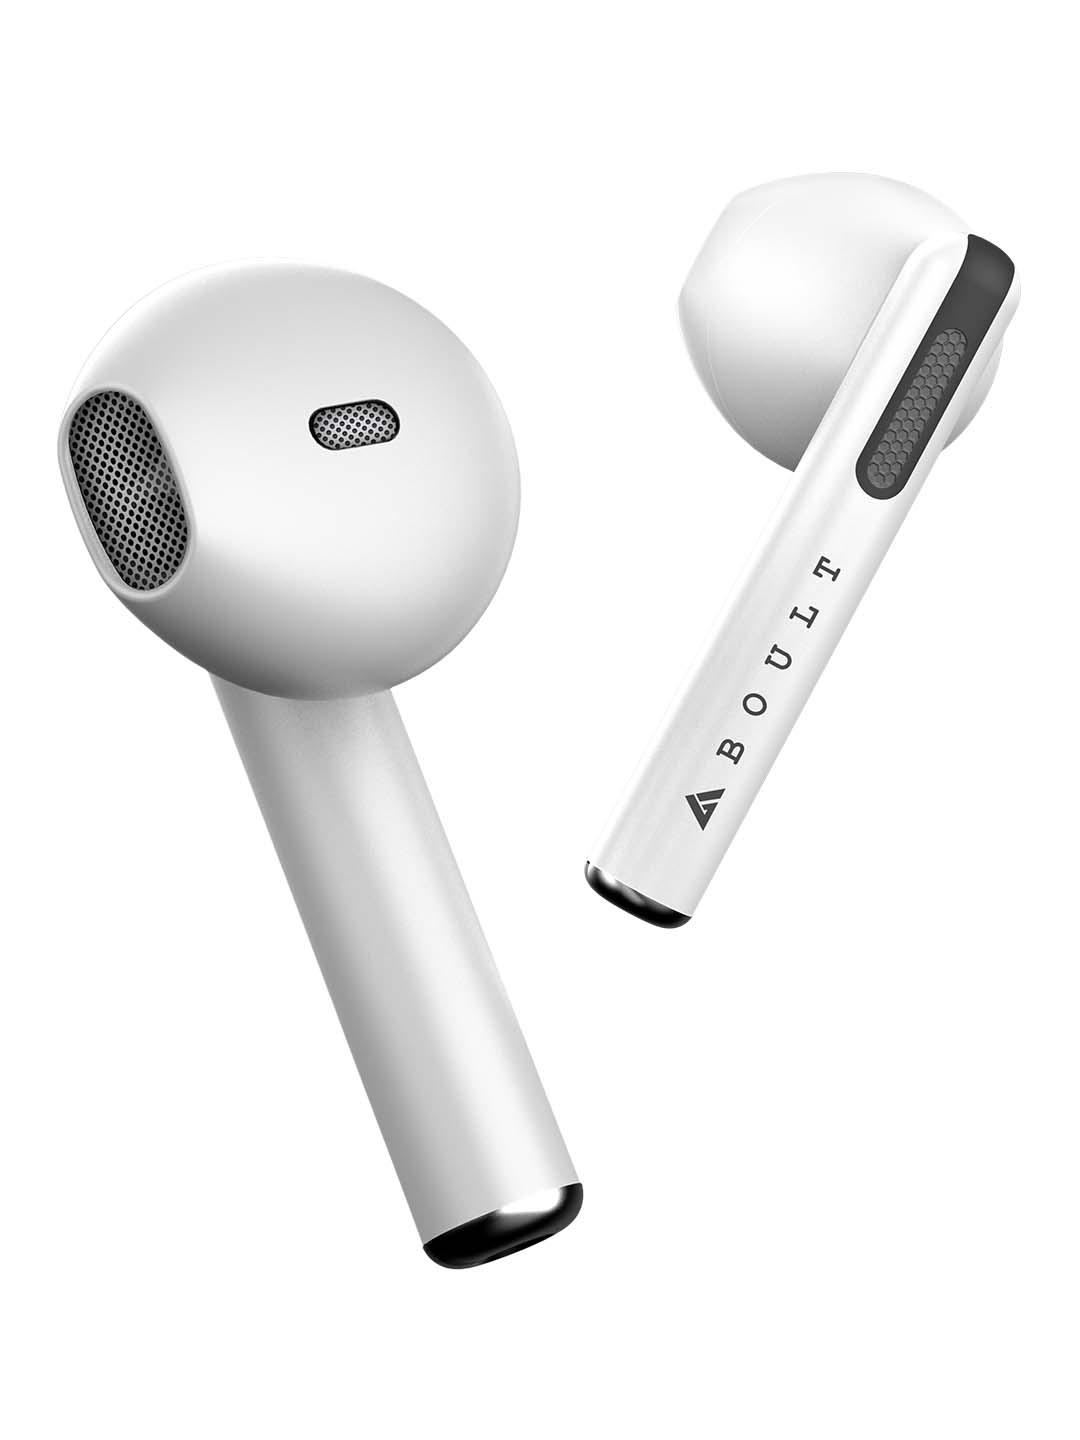 BOULT AUDIO Xpods True Wireless Earbuds - White Price in India